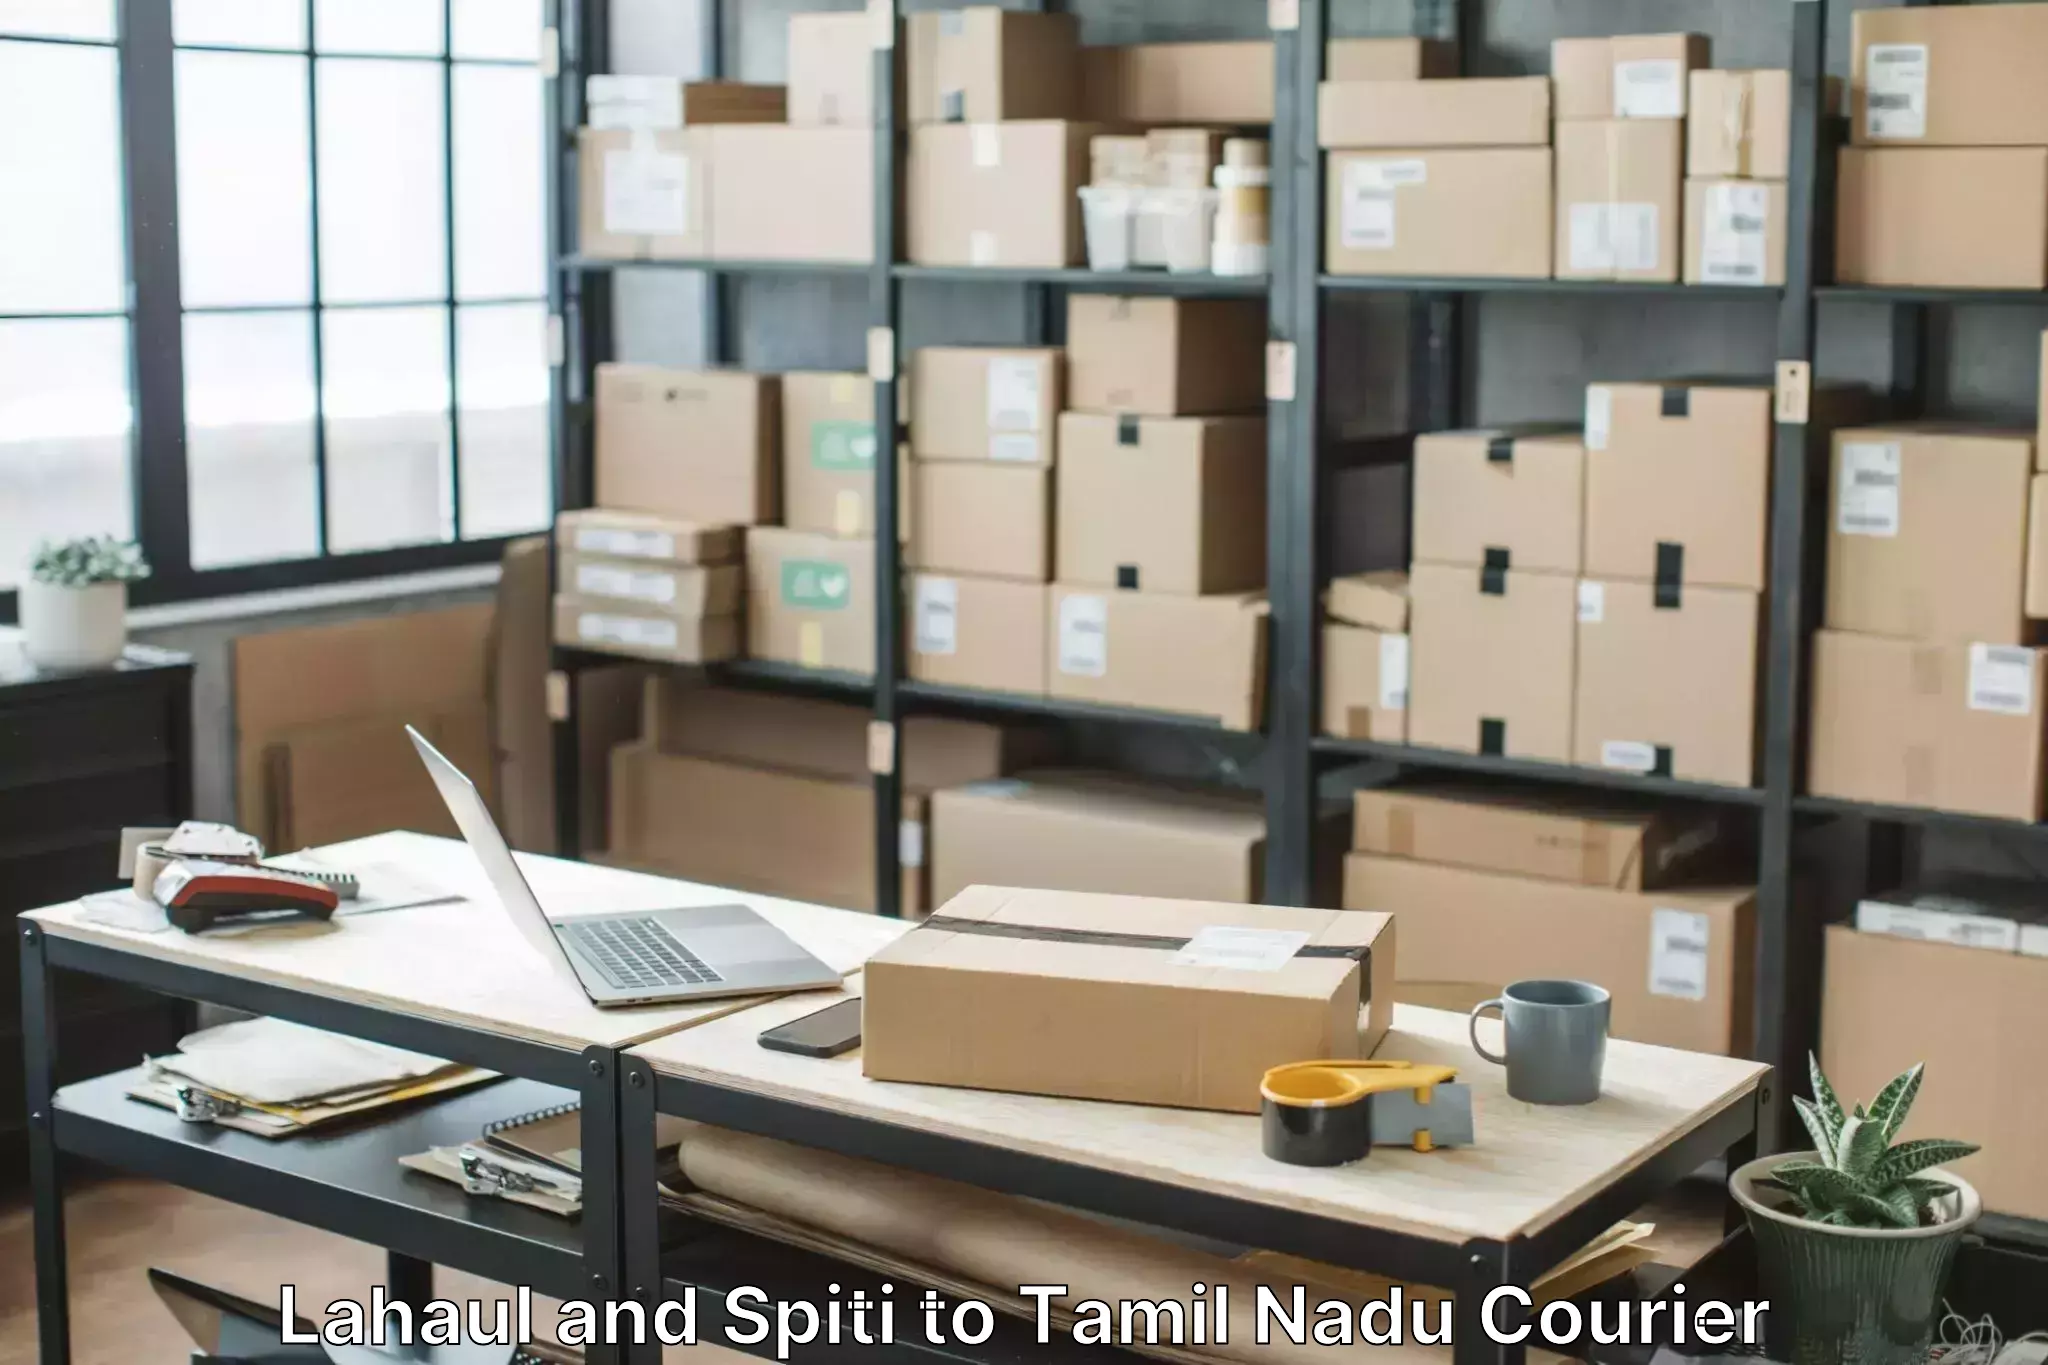 Professional furniture movers Lahaul and Spiti to Chennai Port